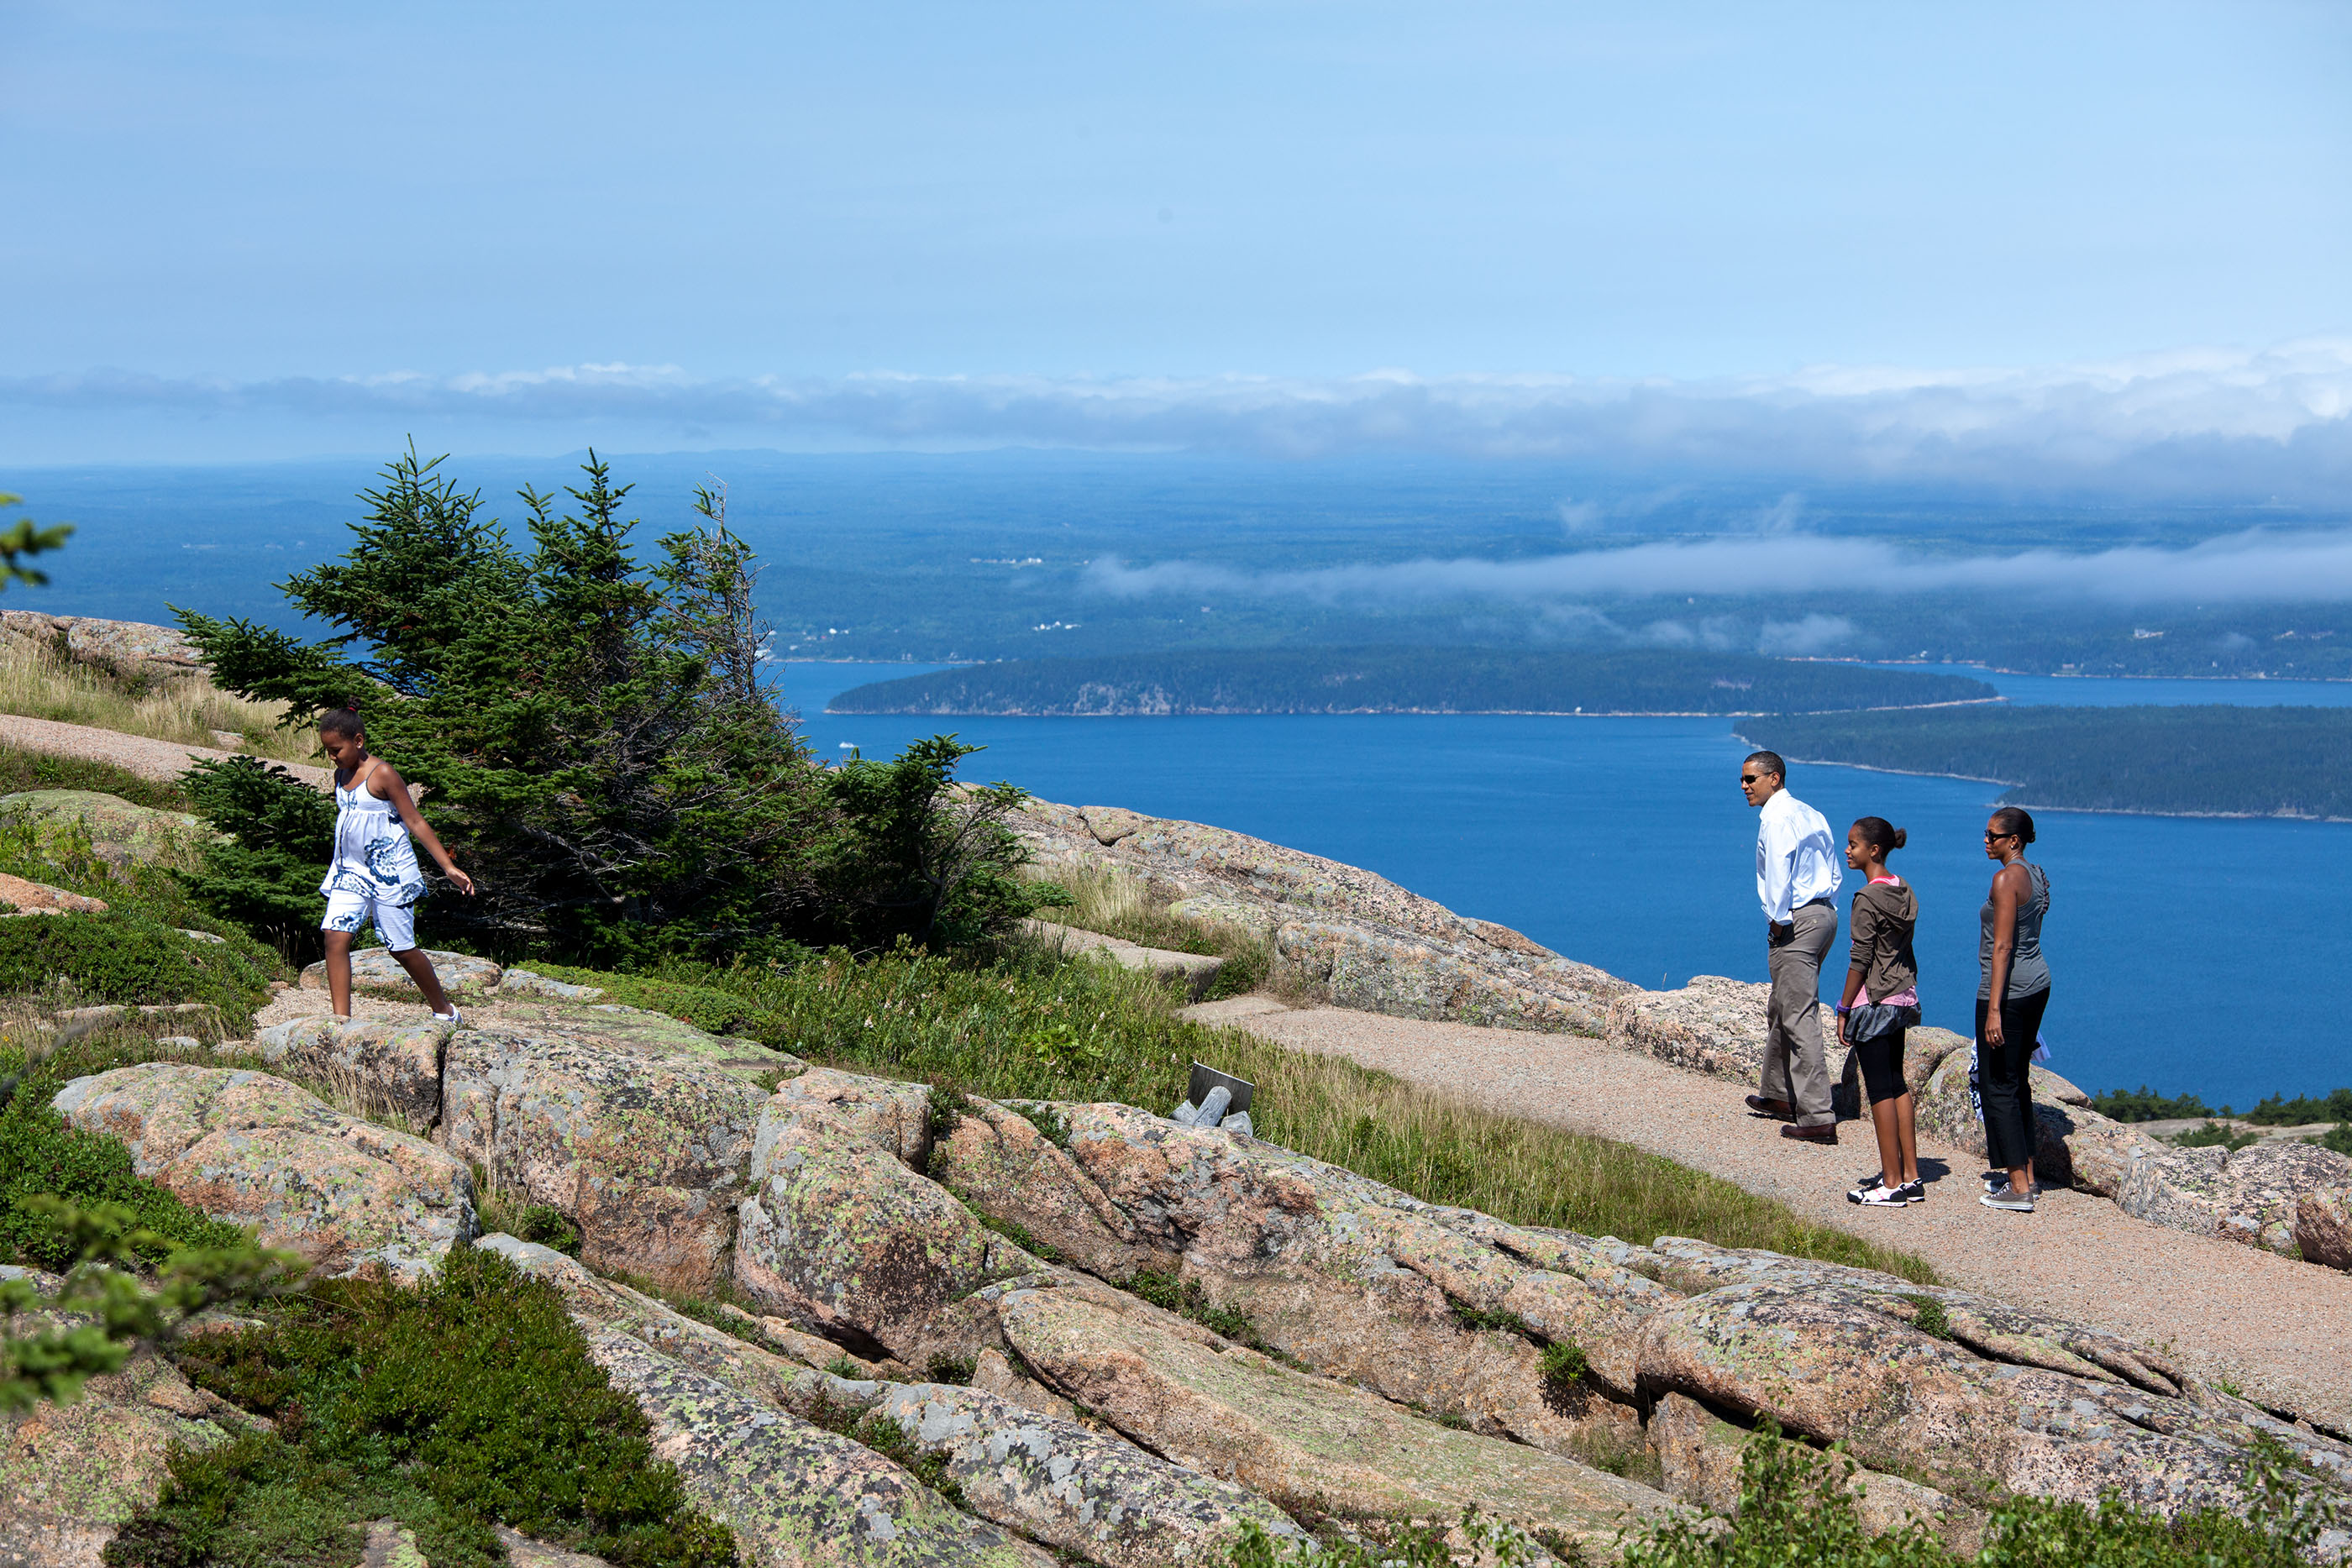 Maine, July 16, 2010. Hiking with the family on Cadillac Mountain at Acadia National Park. (Official White House Photo by Pete Souza)